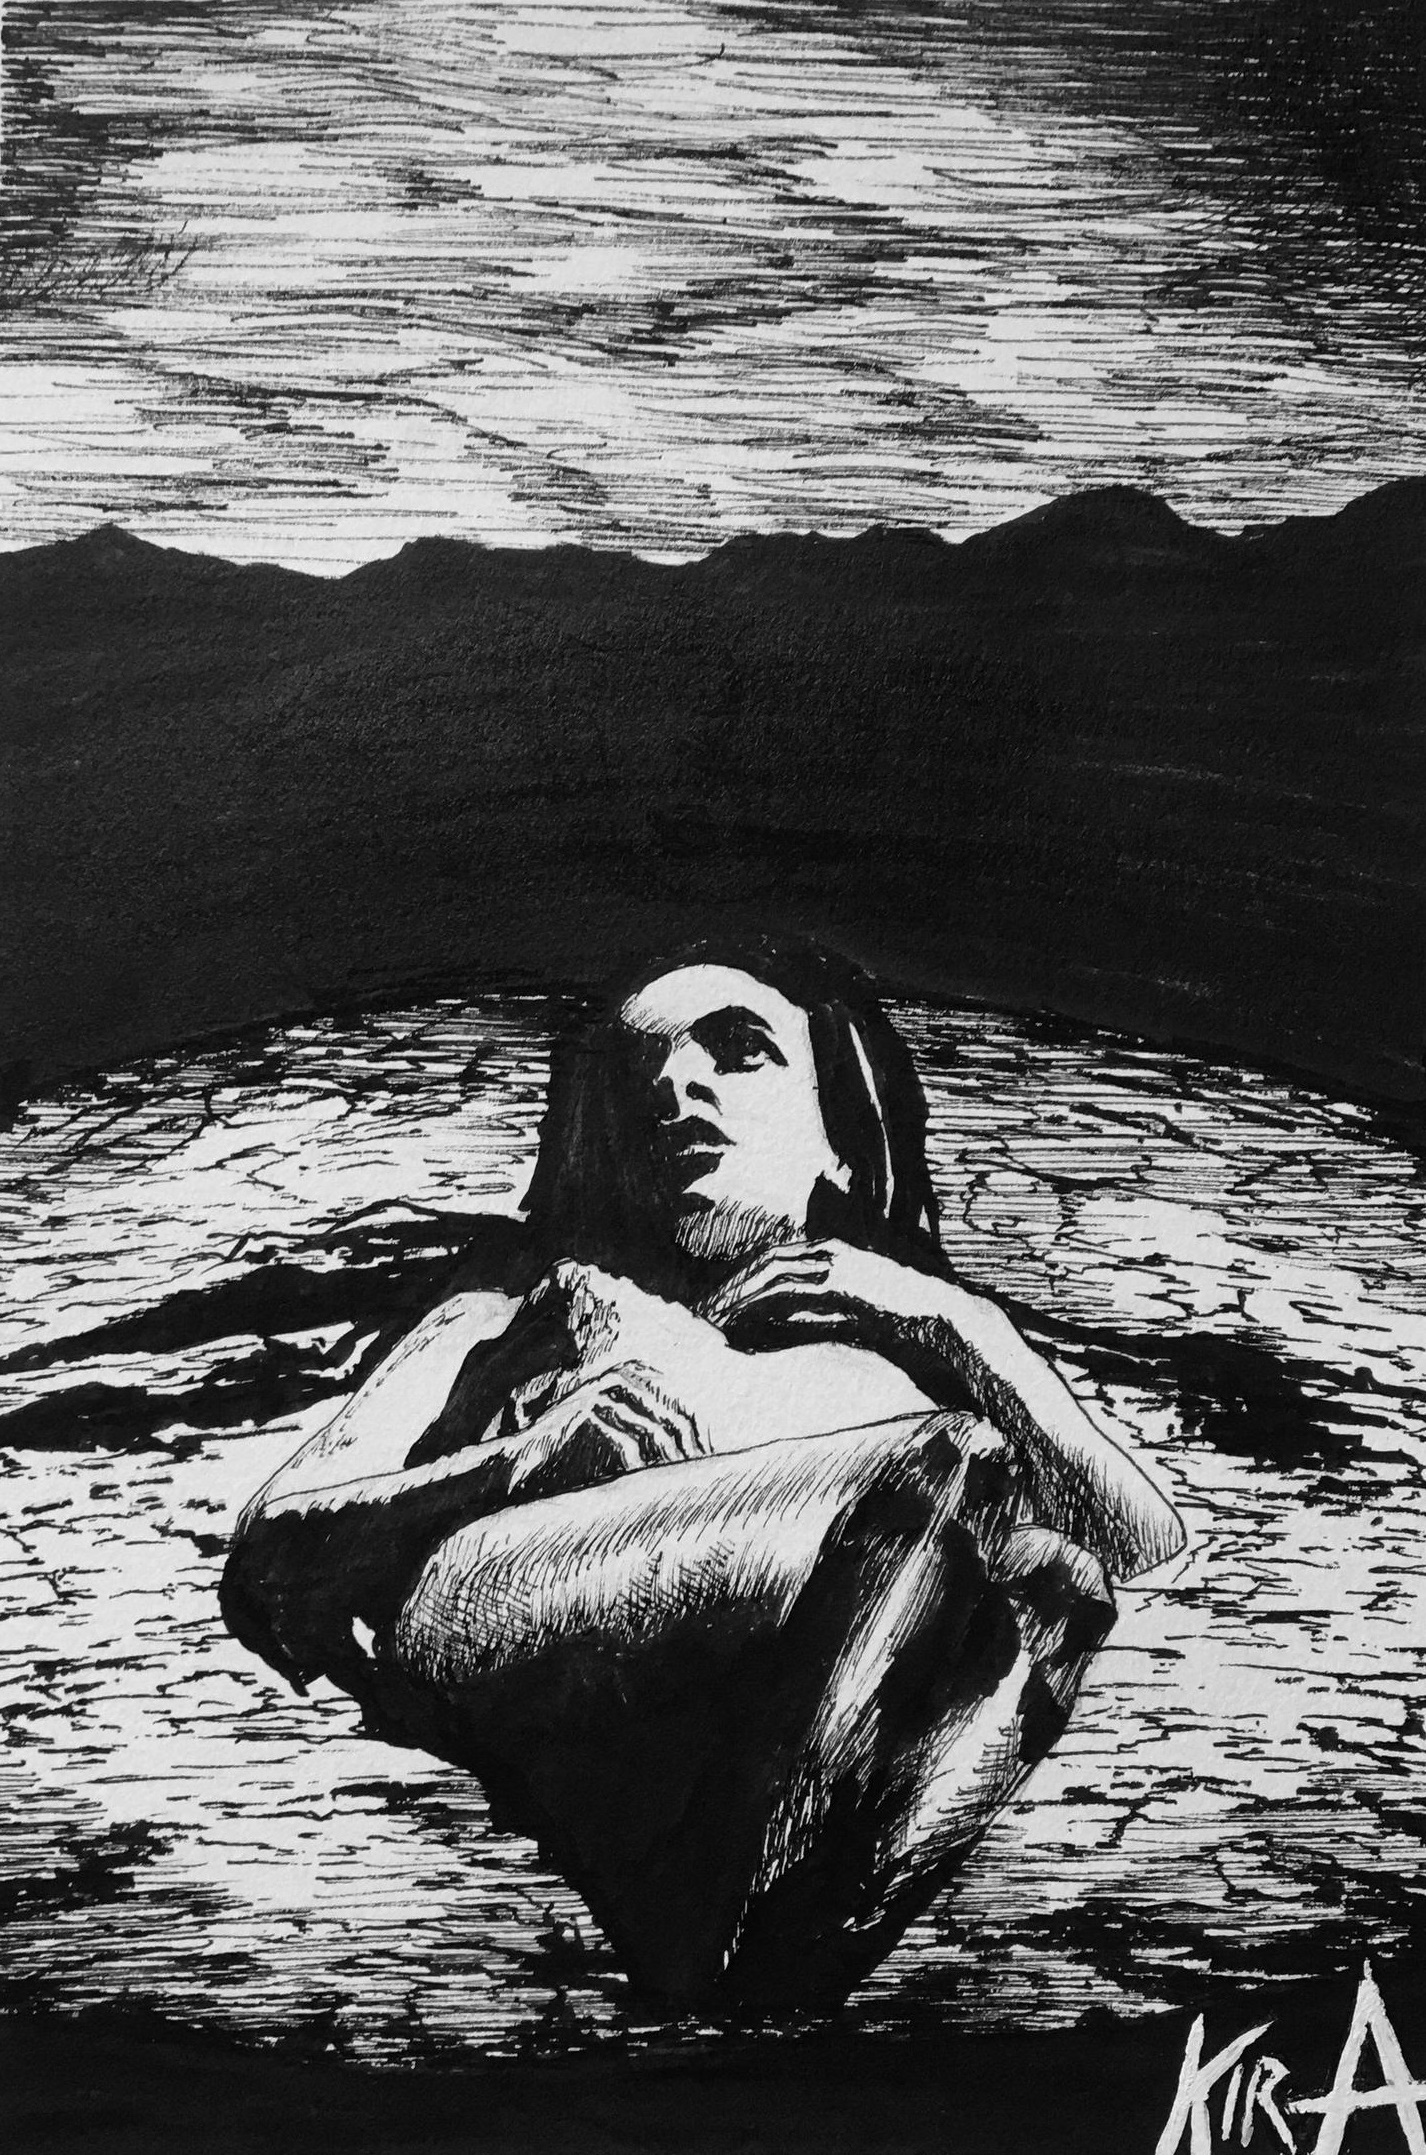 Drawing of a woman lying in dirt surrounded by a mountain range